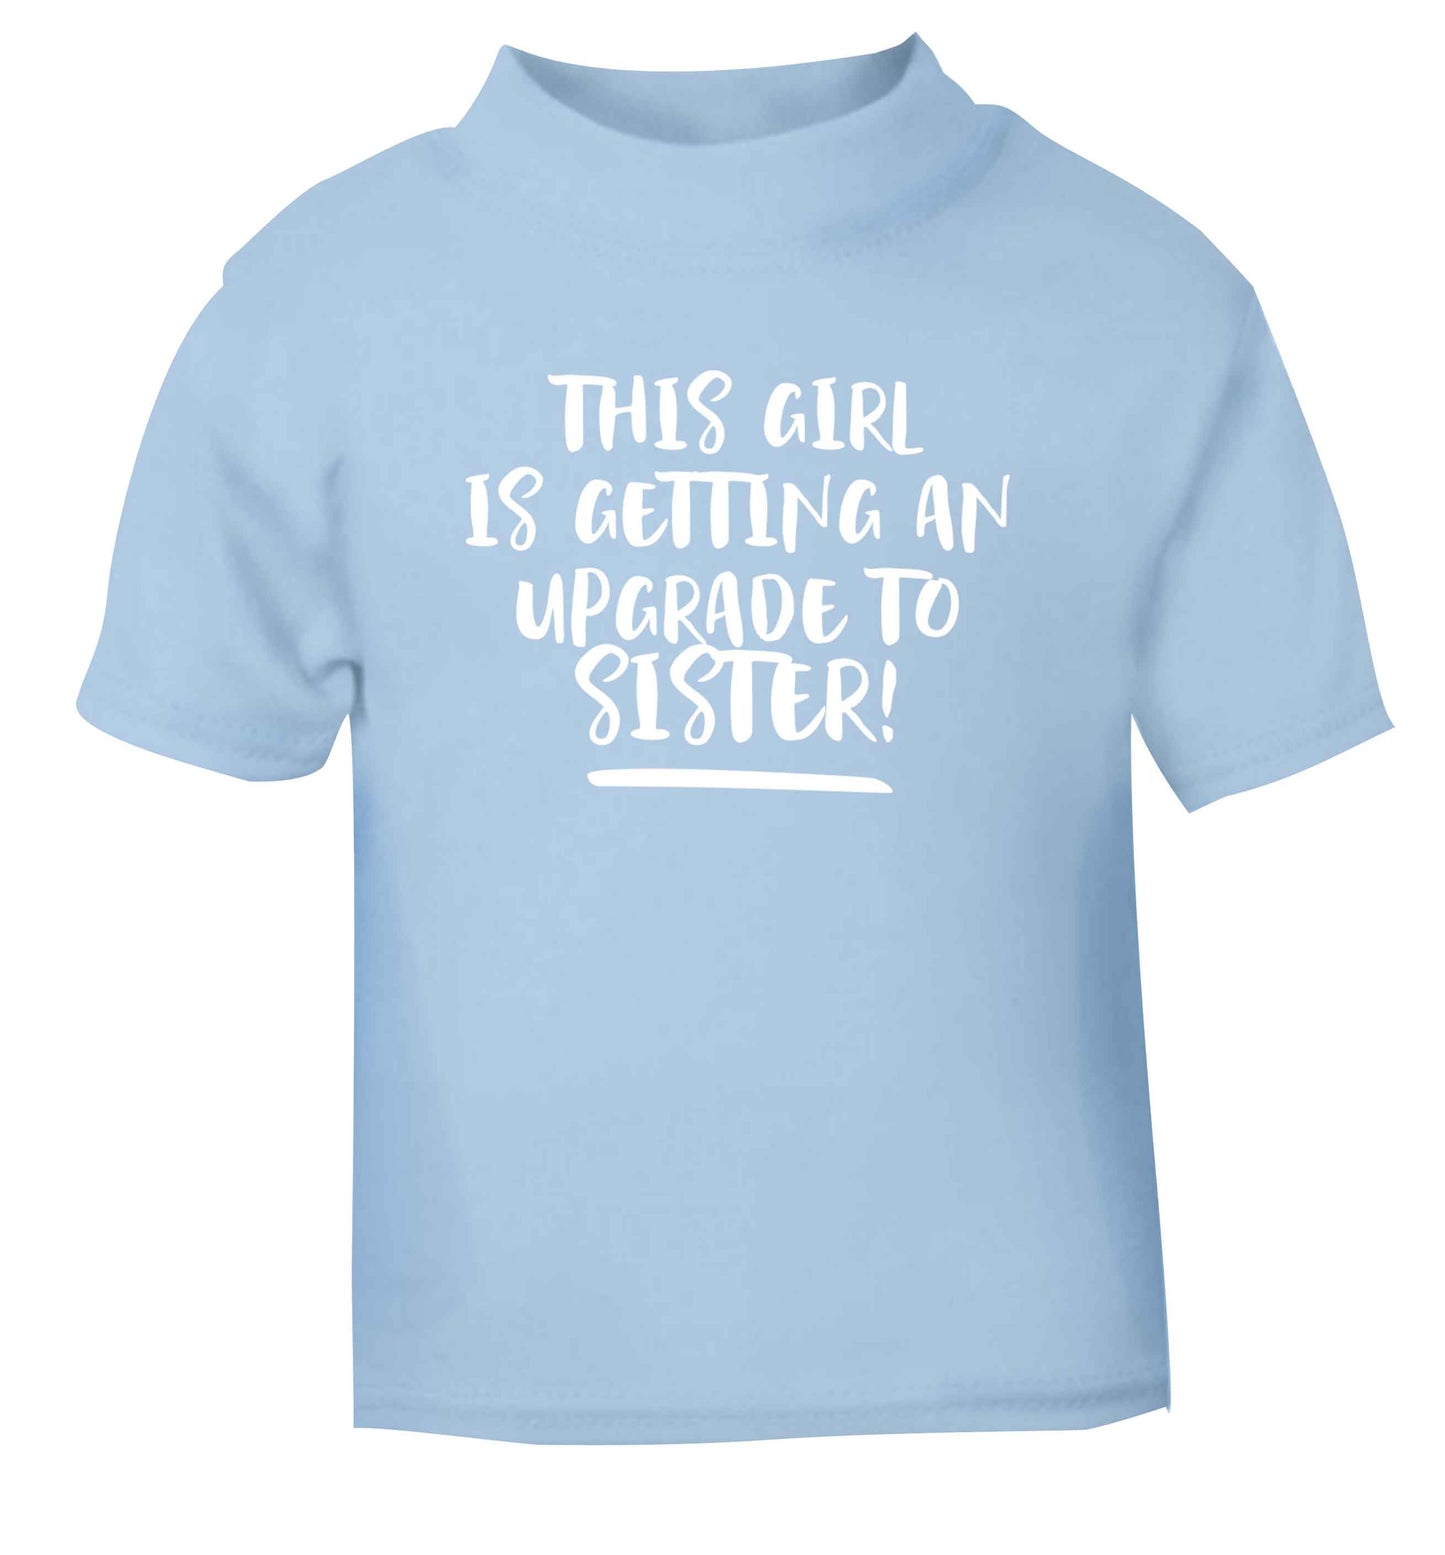 This girl is getting an upgrade to sister! light blue Baby Toddler Tshirt 2 Years